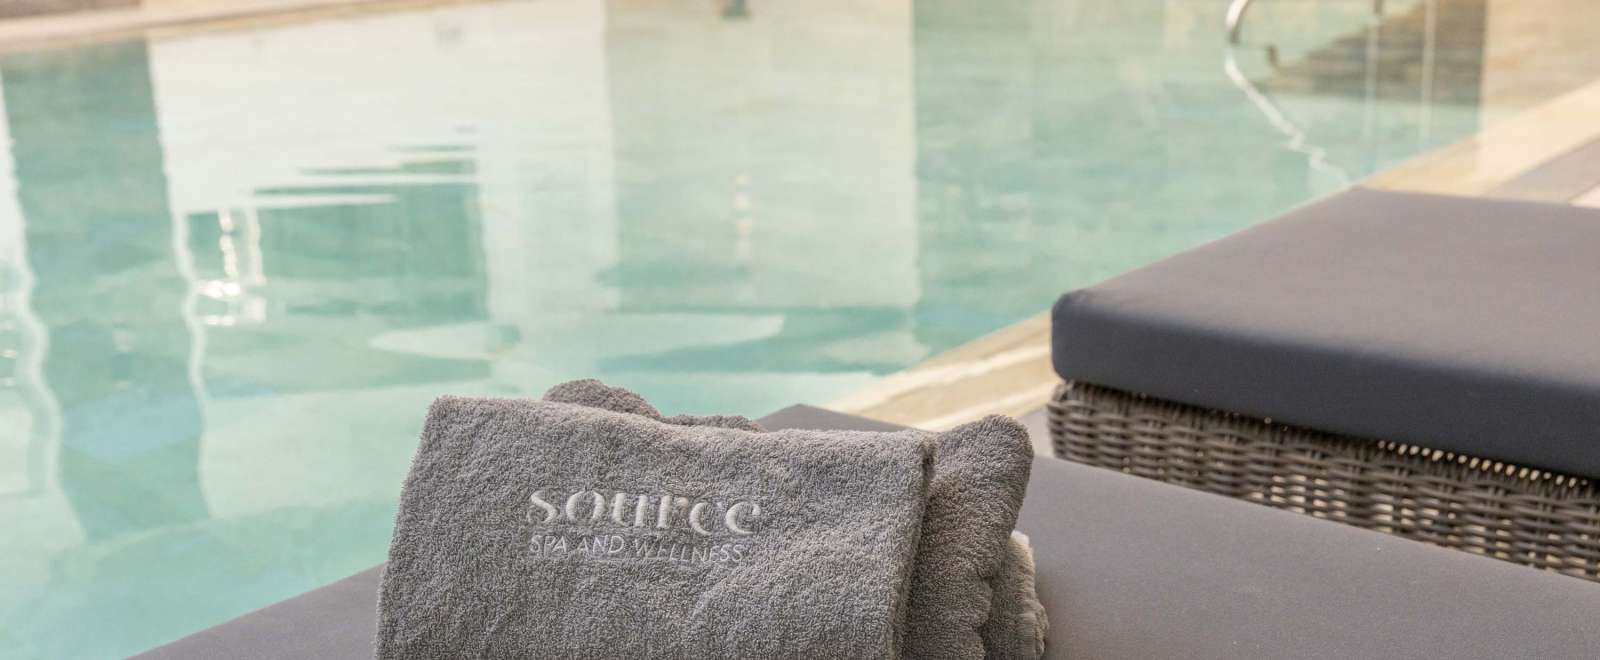 Saunton Sands Hotel Source Spa Towel on Lounger by Indoor Pool